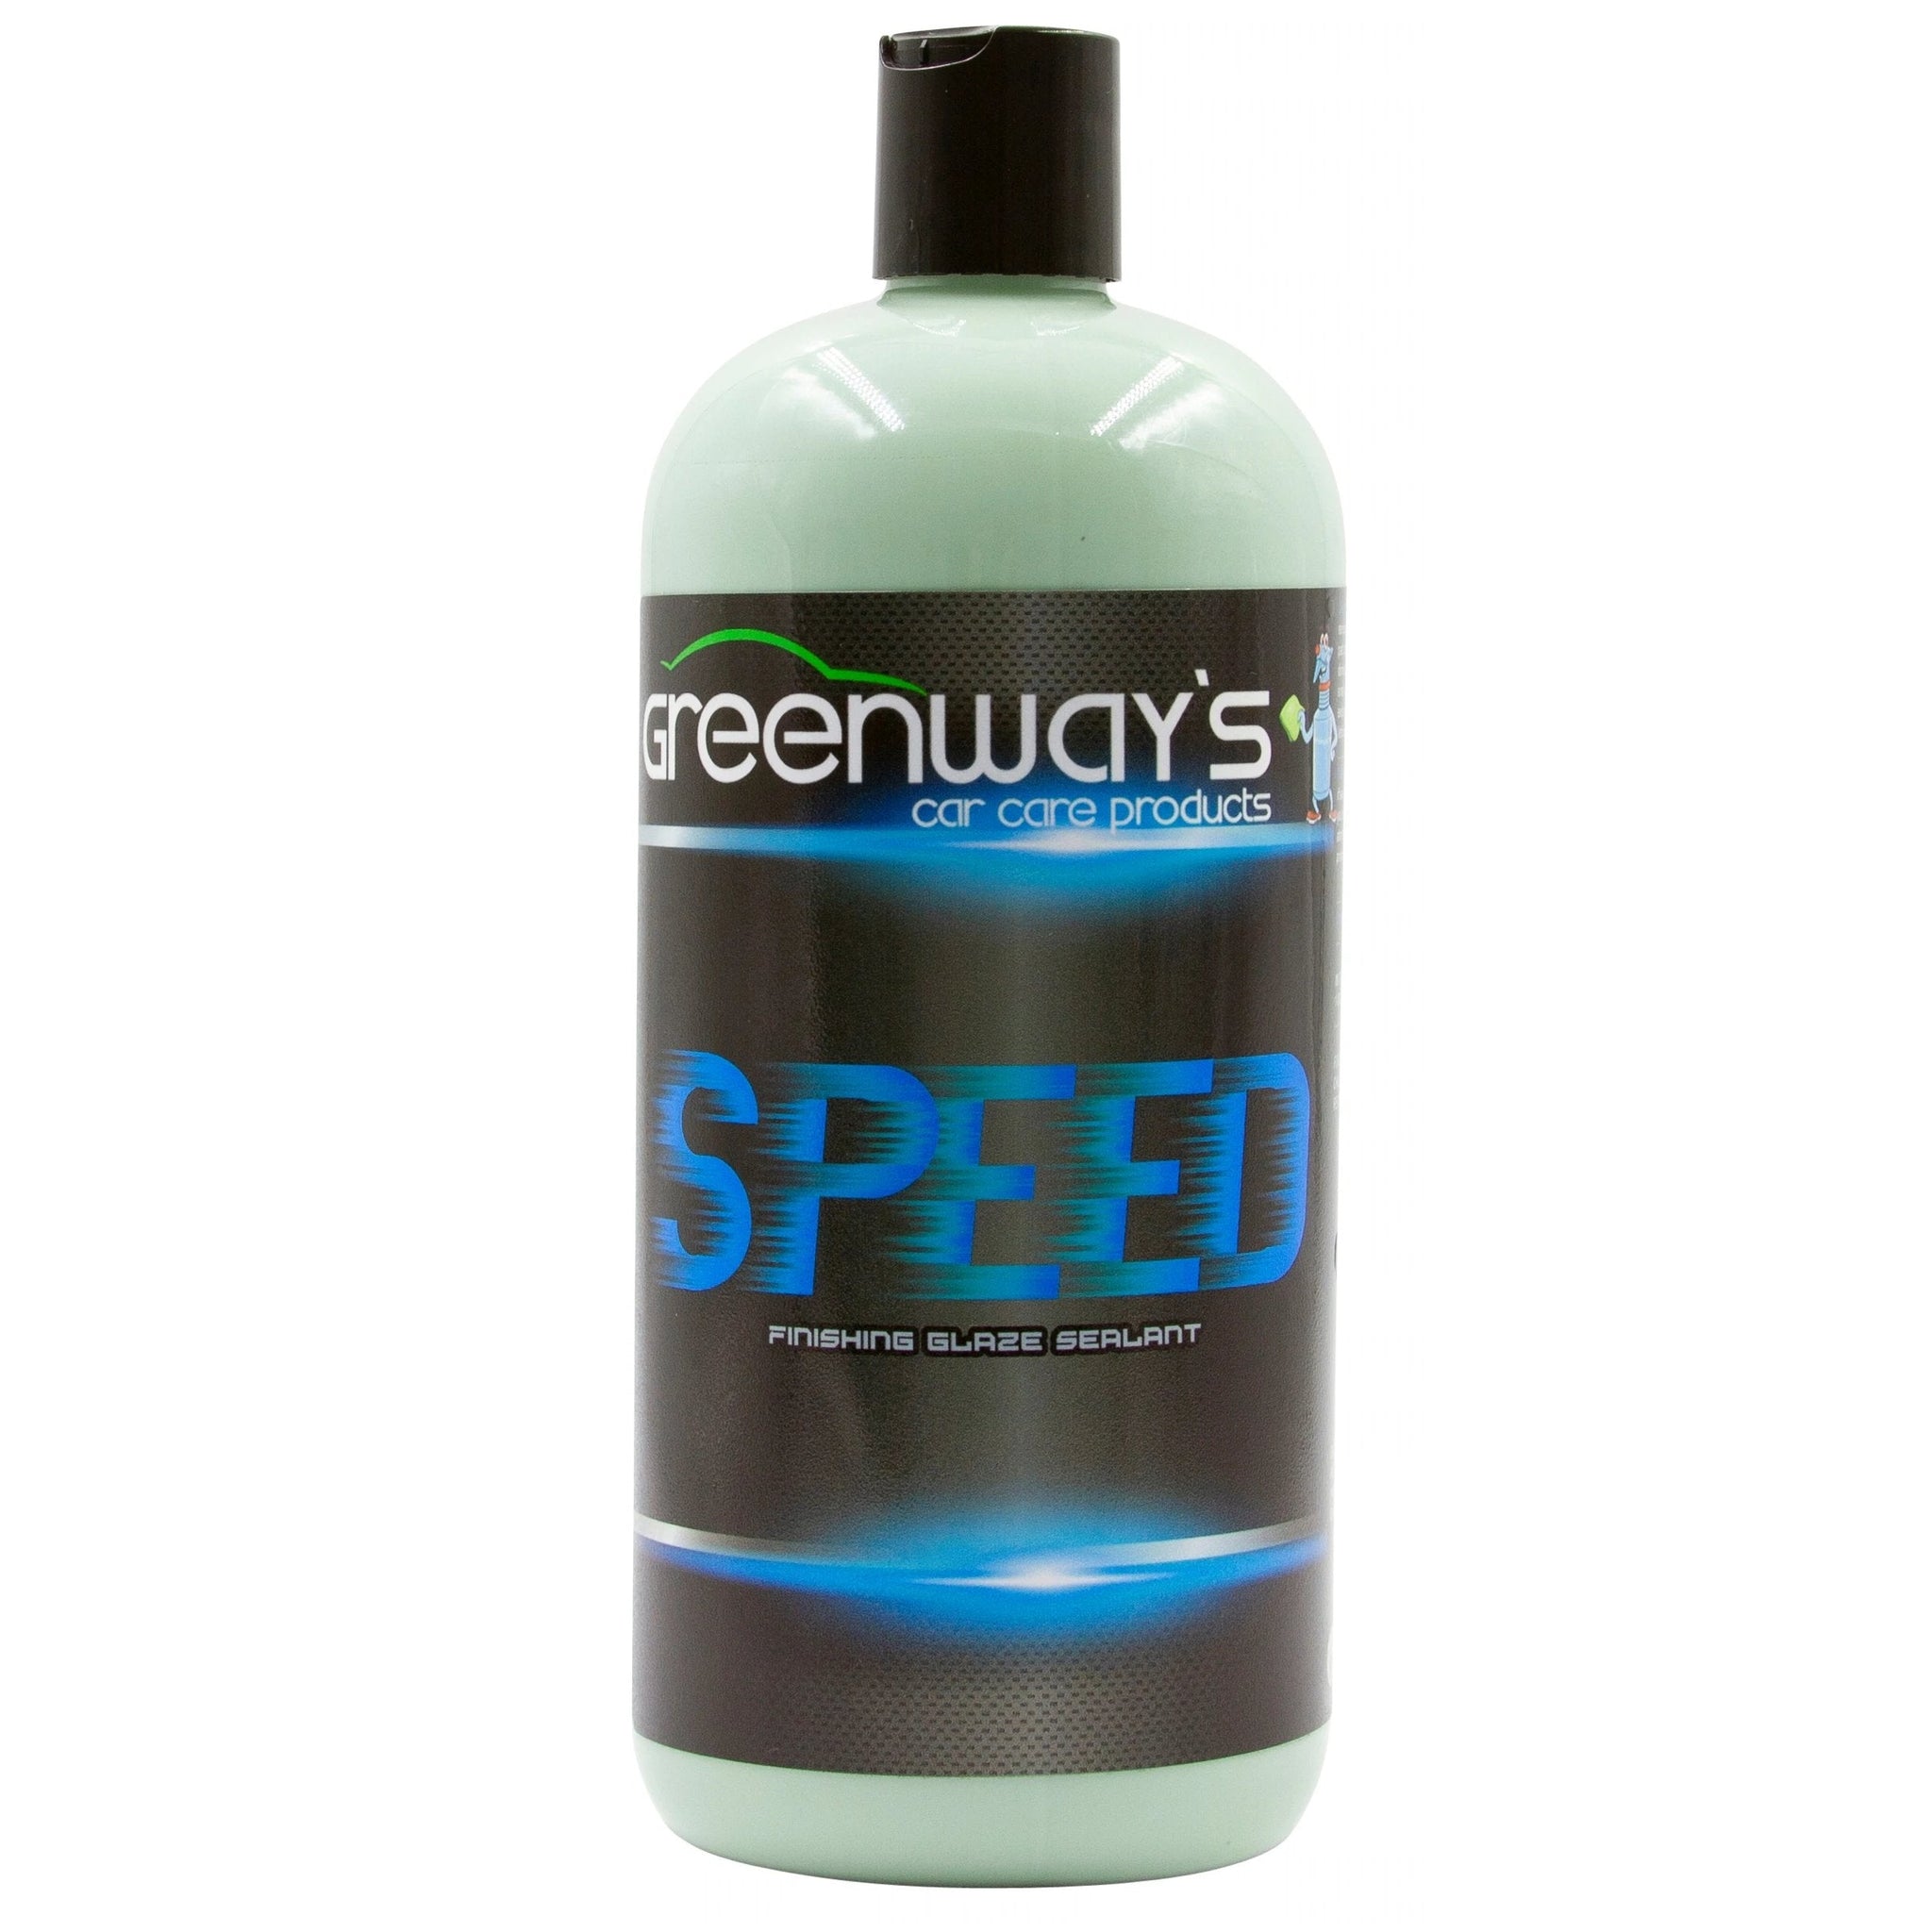 Greenway’s Speed, creamy wax-free, correction and protection finishing glaze sealant for sensitive paintwork, 32 ounces.